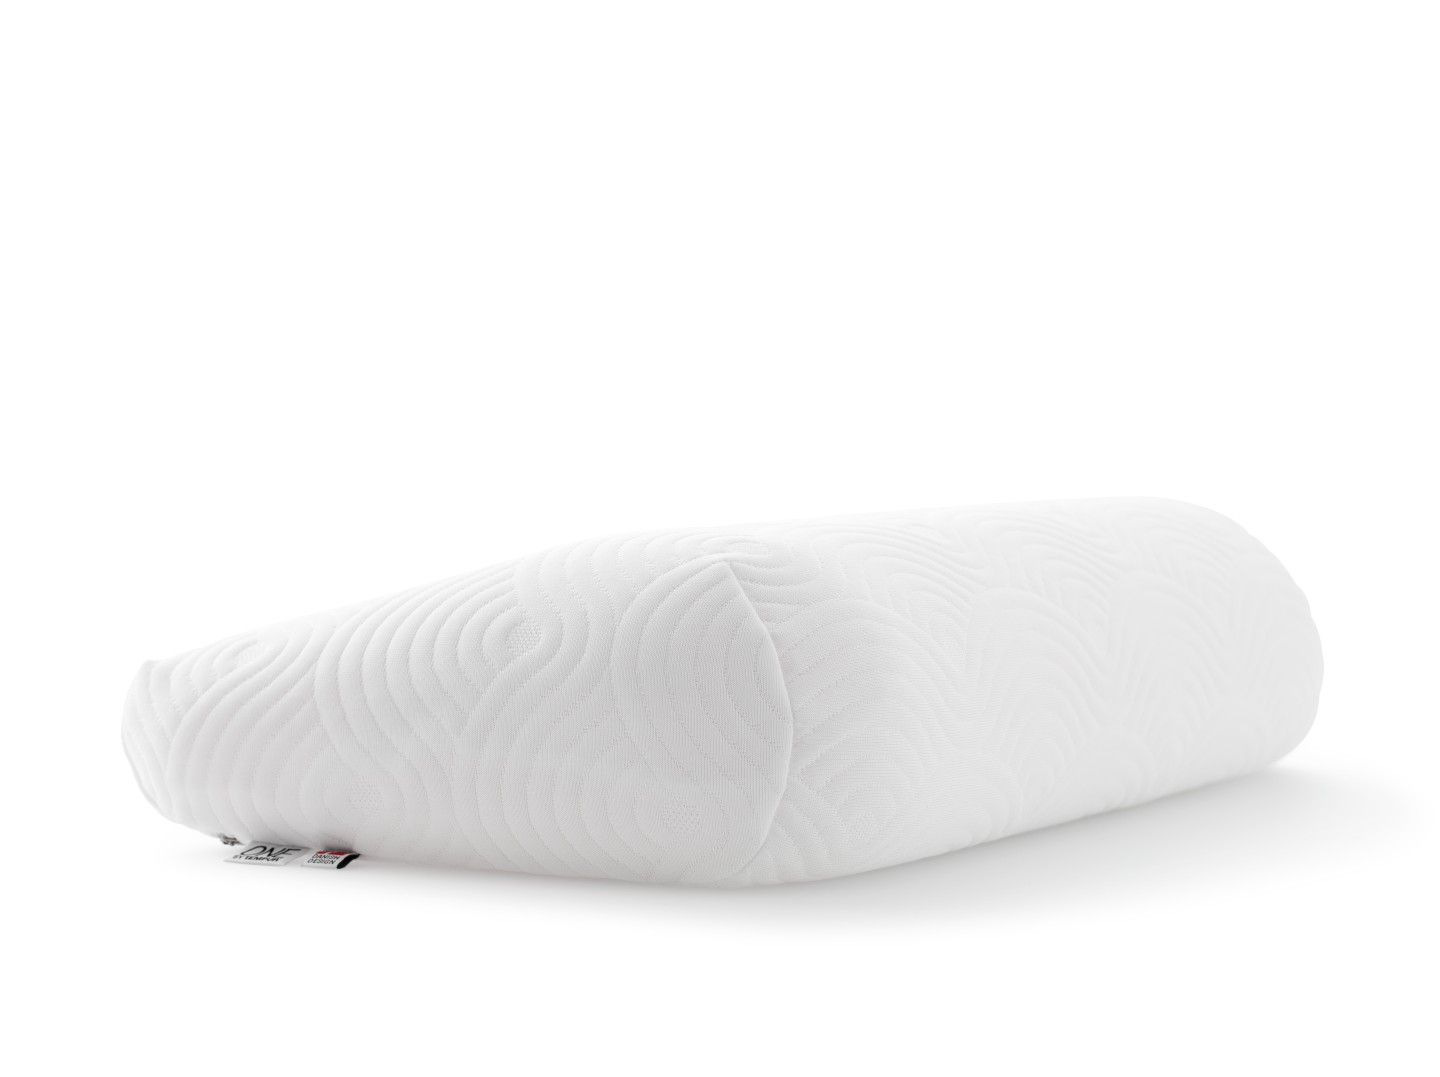 THE ONE PILLOW SUPPORT by Tempur